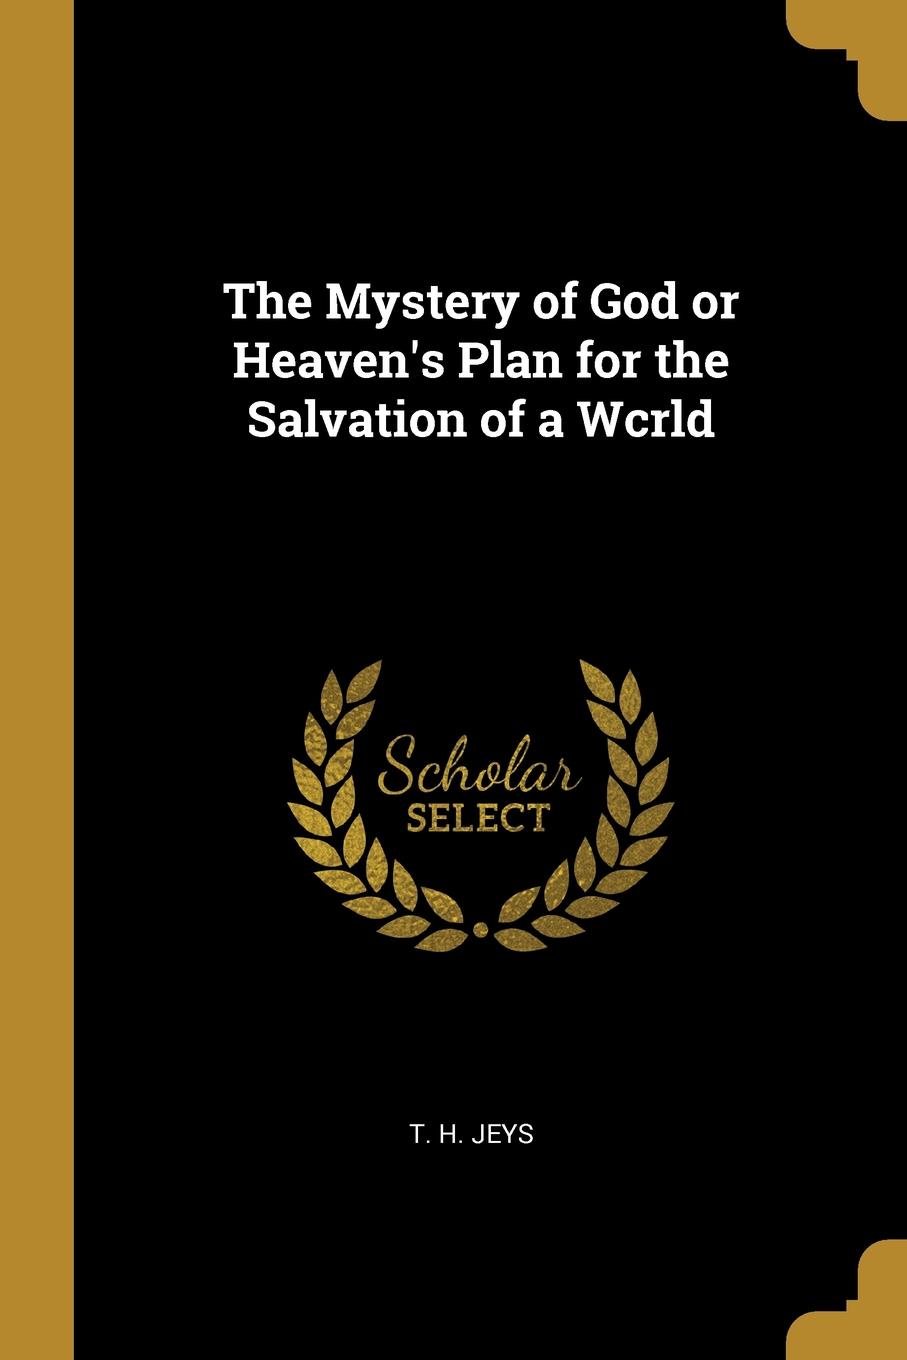 The Mystery of God or Heaven.s Plan for the Salvation of a Wcrld